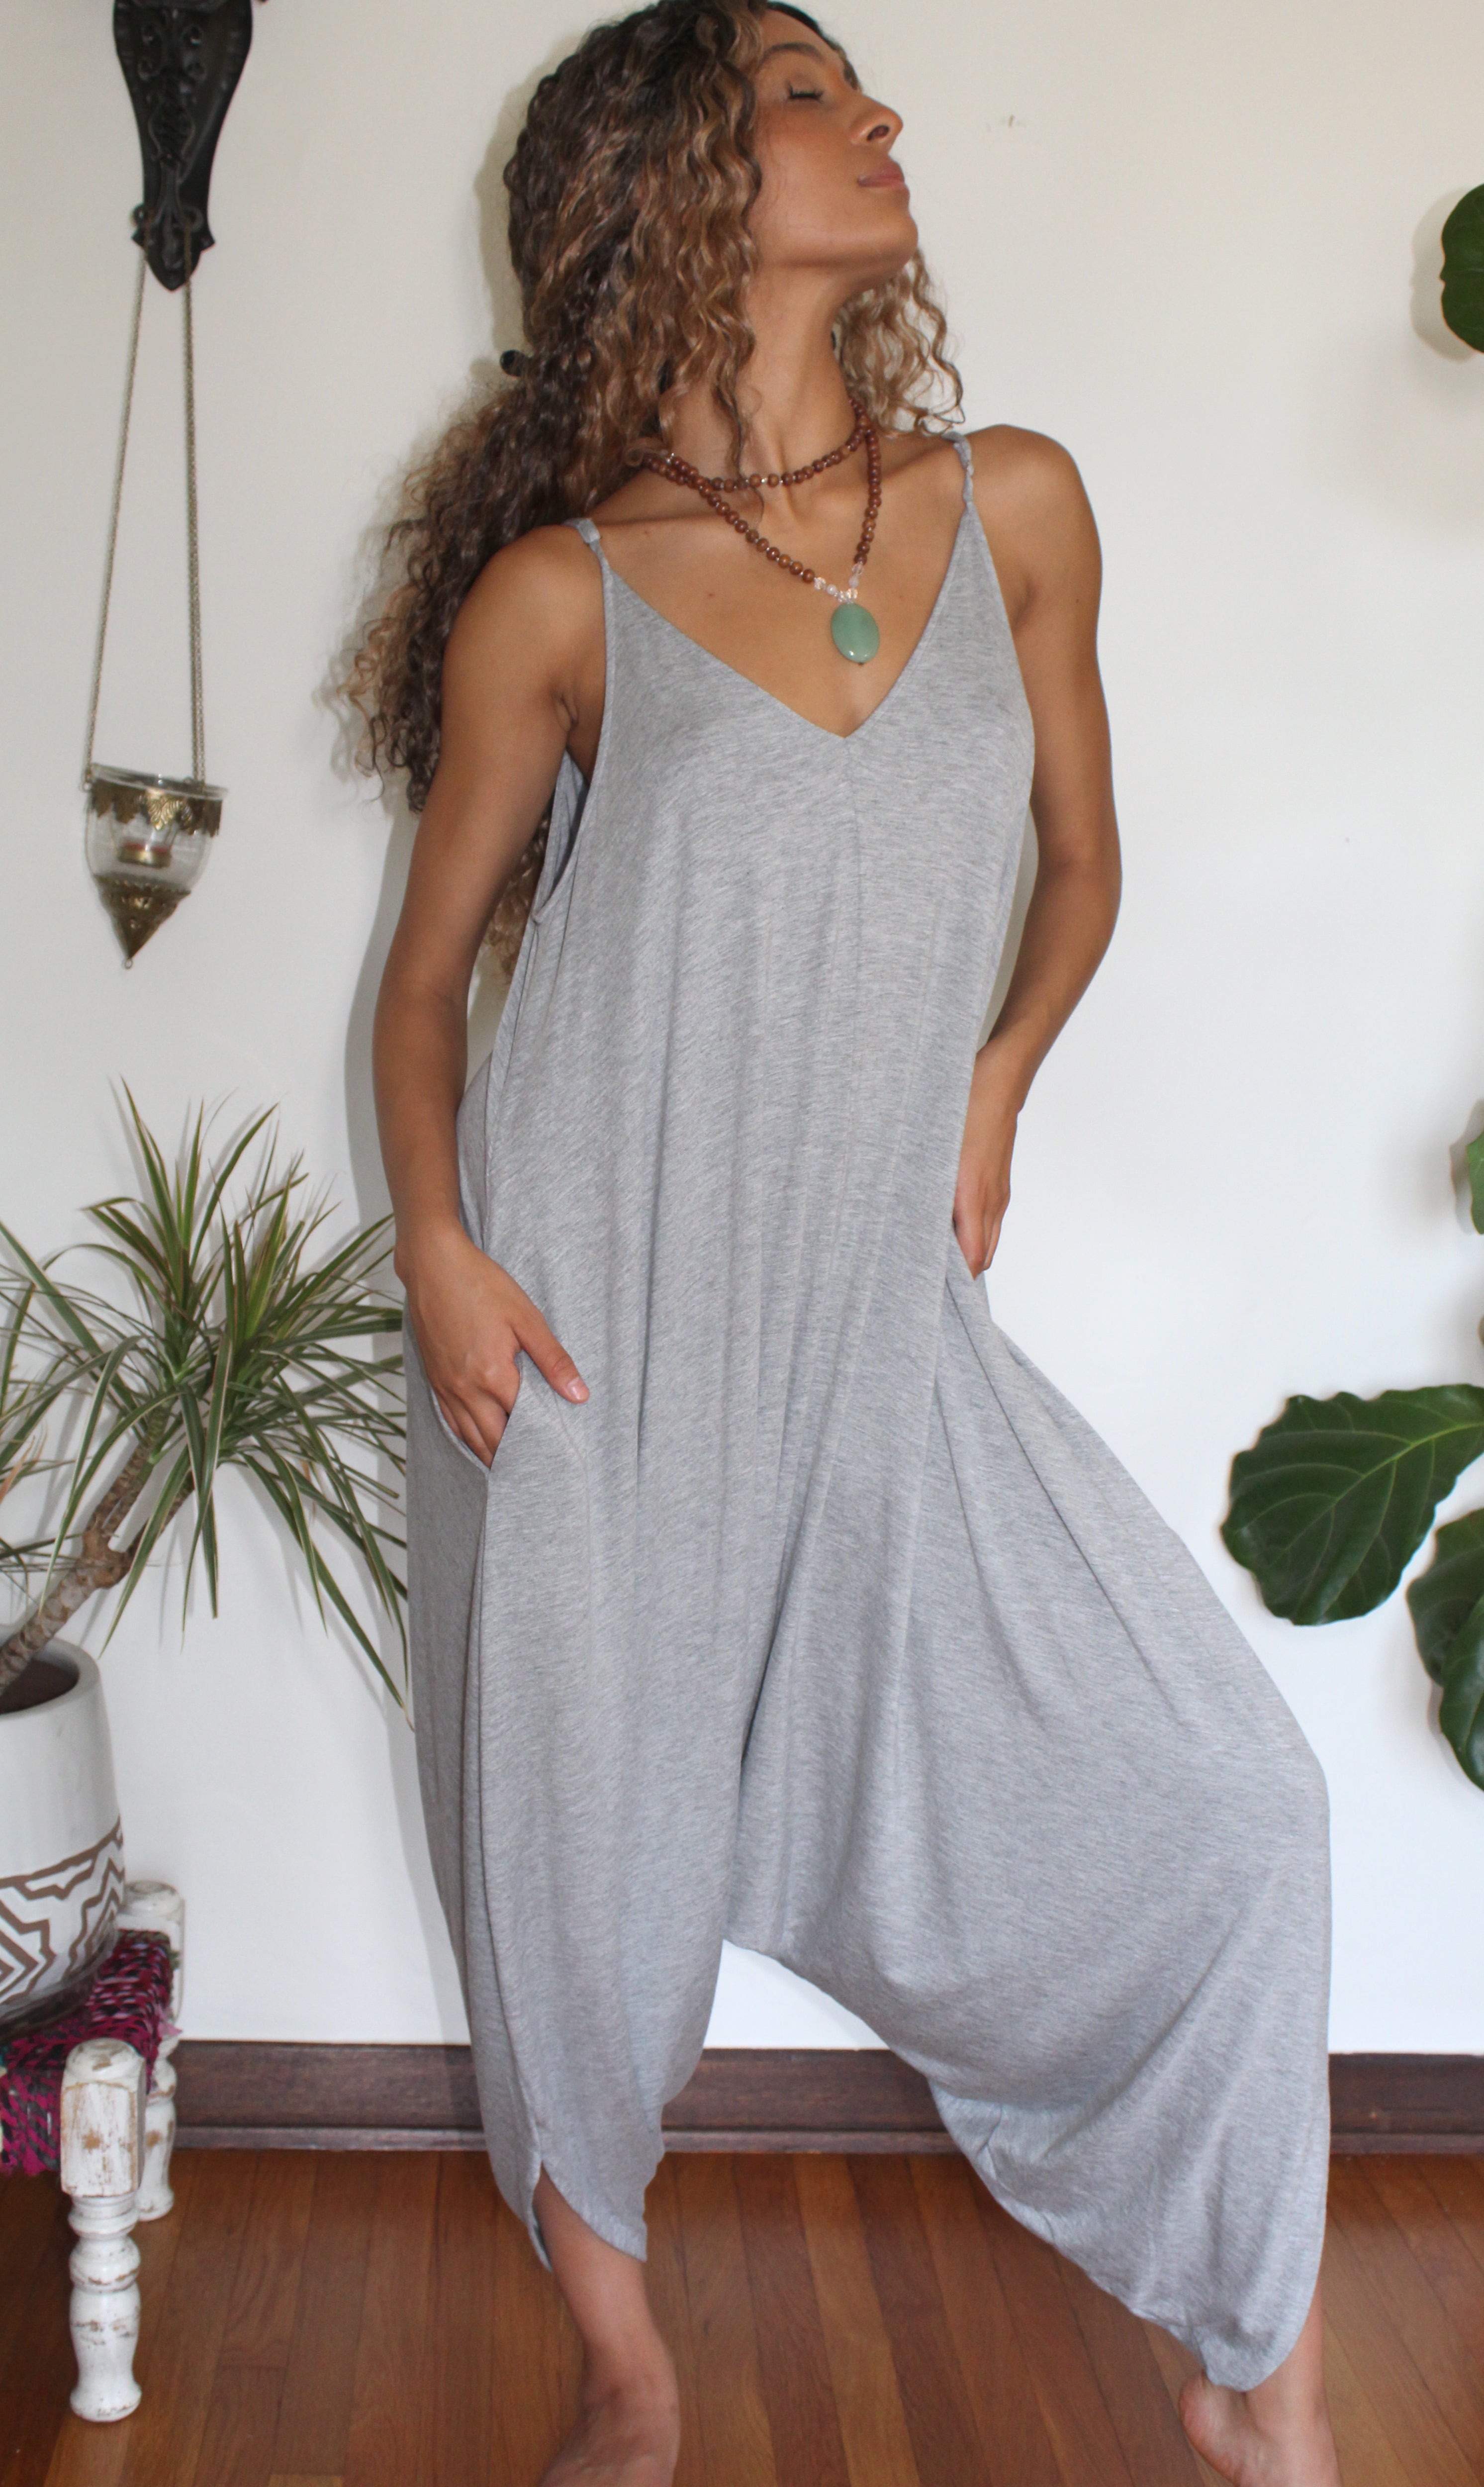 Heather Grey Yoga Knit Jumpsuit with Pockets - Yoga Clothing by Daughters  of Culture